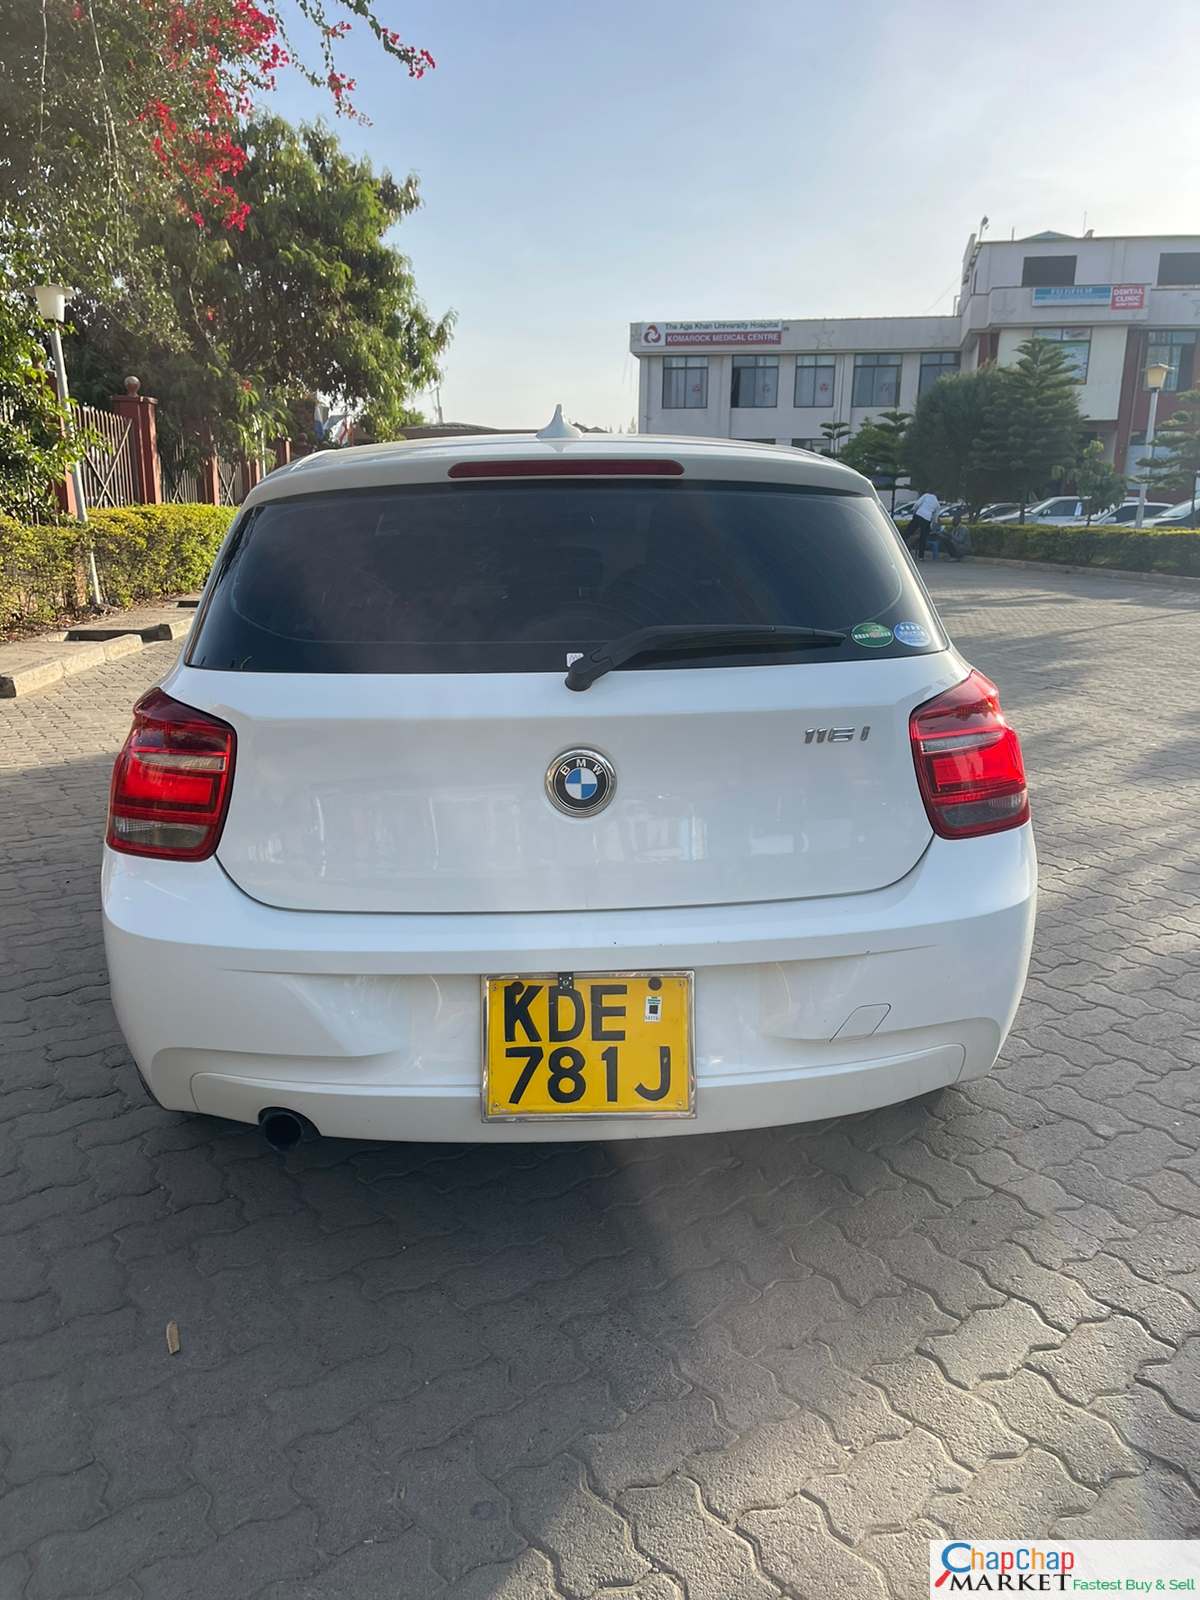 Bmw 116i CHEAPEST You Pay 30% deposit installments Trade in Ok EXCLUSIVE (SOLD)